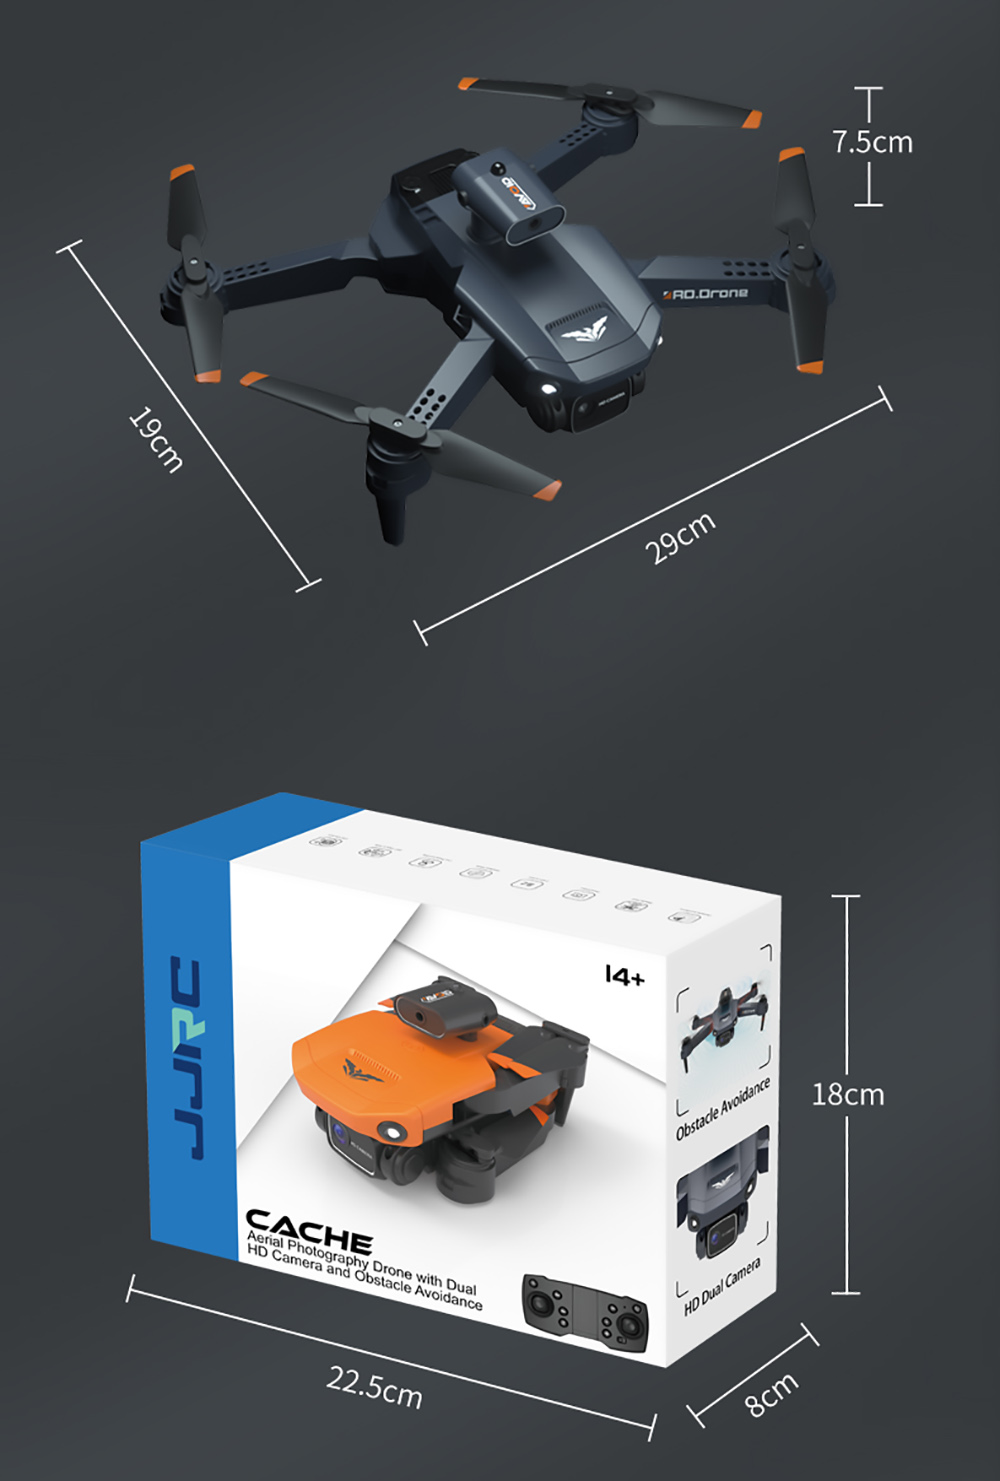 JJRC H106 Foldable RC Drone with All-Round Obstacle Avoidance Function Quadcopter with Two Cameras - Black